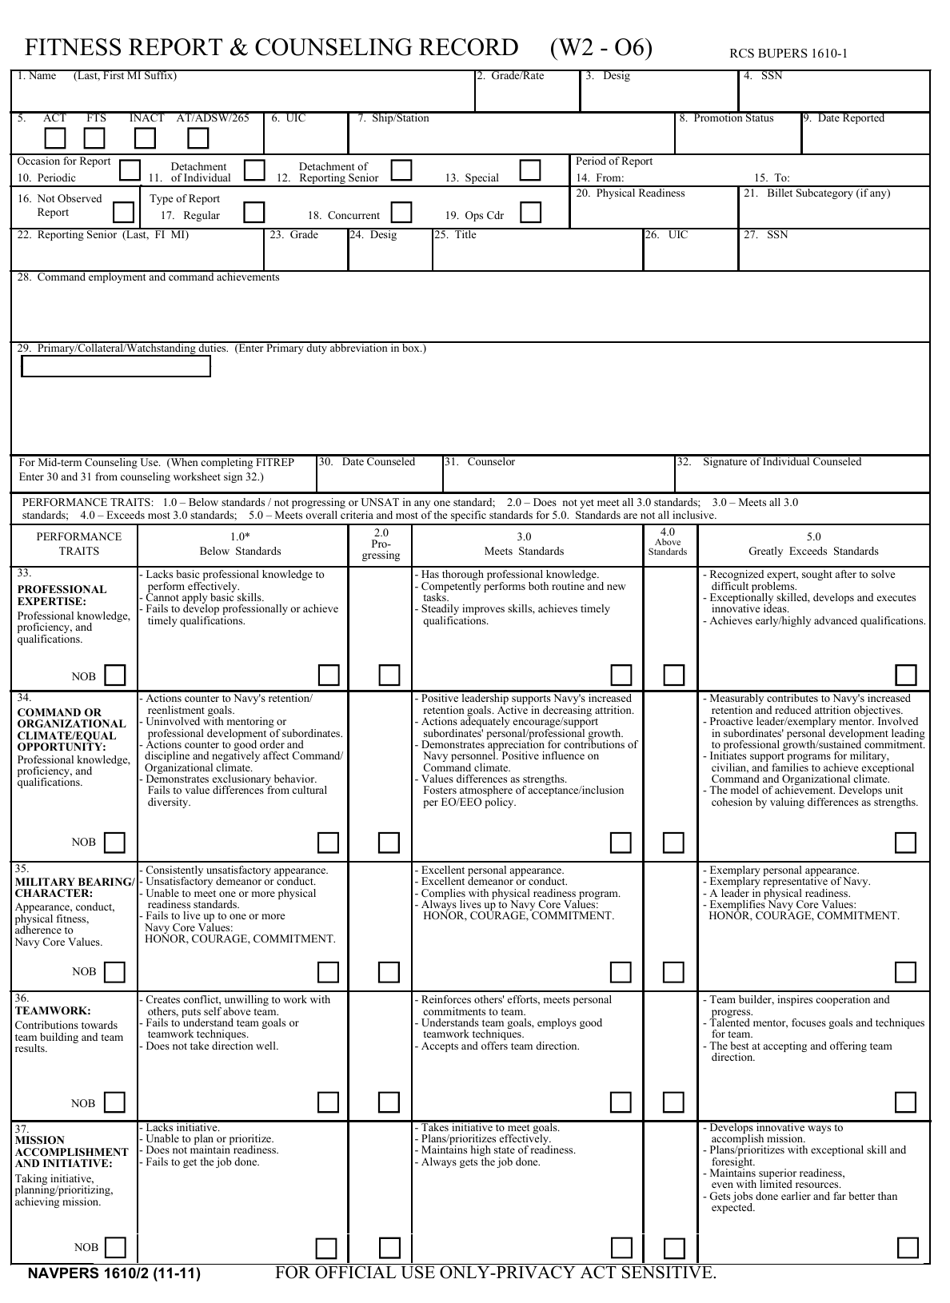 NAVPERS Form 1610 / 2 Fitness Report  Counseling Record (W2 - O6), Page 1